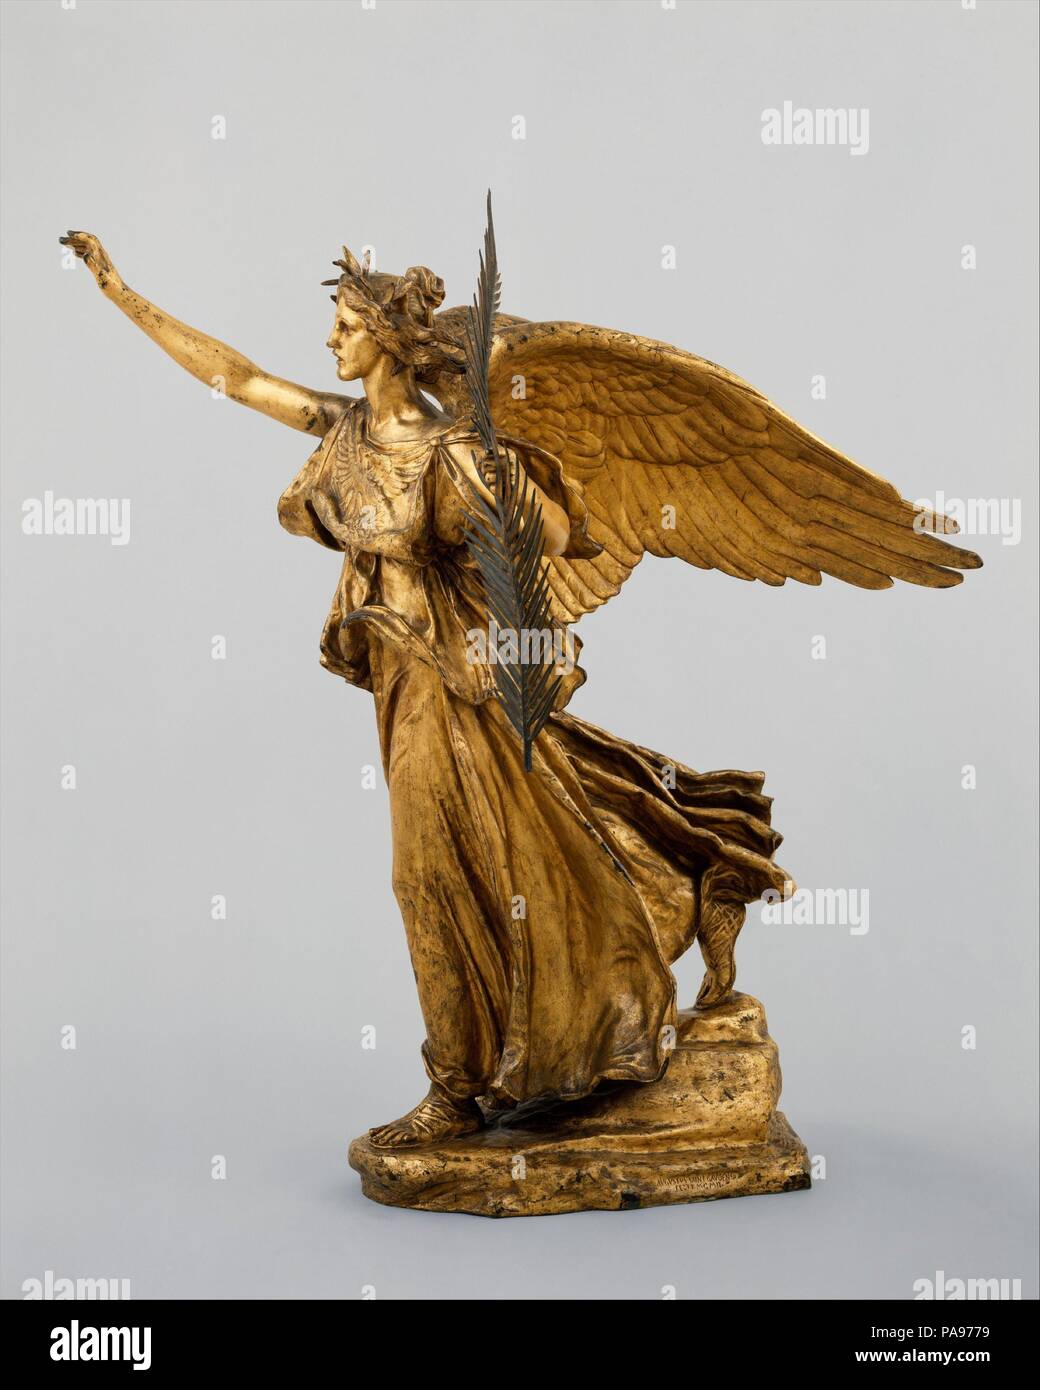 Victory. Artist: Augustus Saint-Gaudens (American, Dublin 1848-1907 Cornish, New Hampshire). Dimensions: 38 x 9 1/2 x 18 1/2 in., (96.5 x 24.1 x 47 cm). Date: 1892-1903; this cast, 1914 or after (by 1916).  Adapted from the full-size figure of Victory on Saint-Gaudens's equestrian monument to the Civil War general William Tecumseh Sherman (1892-1903; Grand Army Plaza, Manhattan), this winged allegorical figure is depicted as a triumphant guiding force. Her classicizing gown is emblazoned with an eagle, and she wears a crown of laurel and holds a palm frond--both traditional emblems of victory. Stock Photo